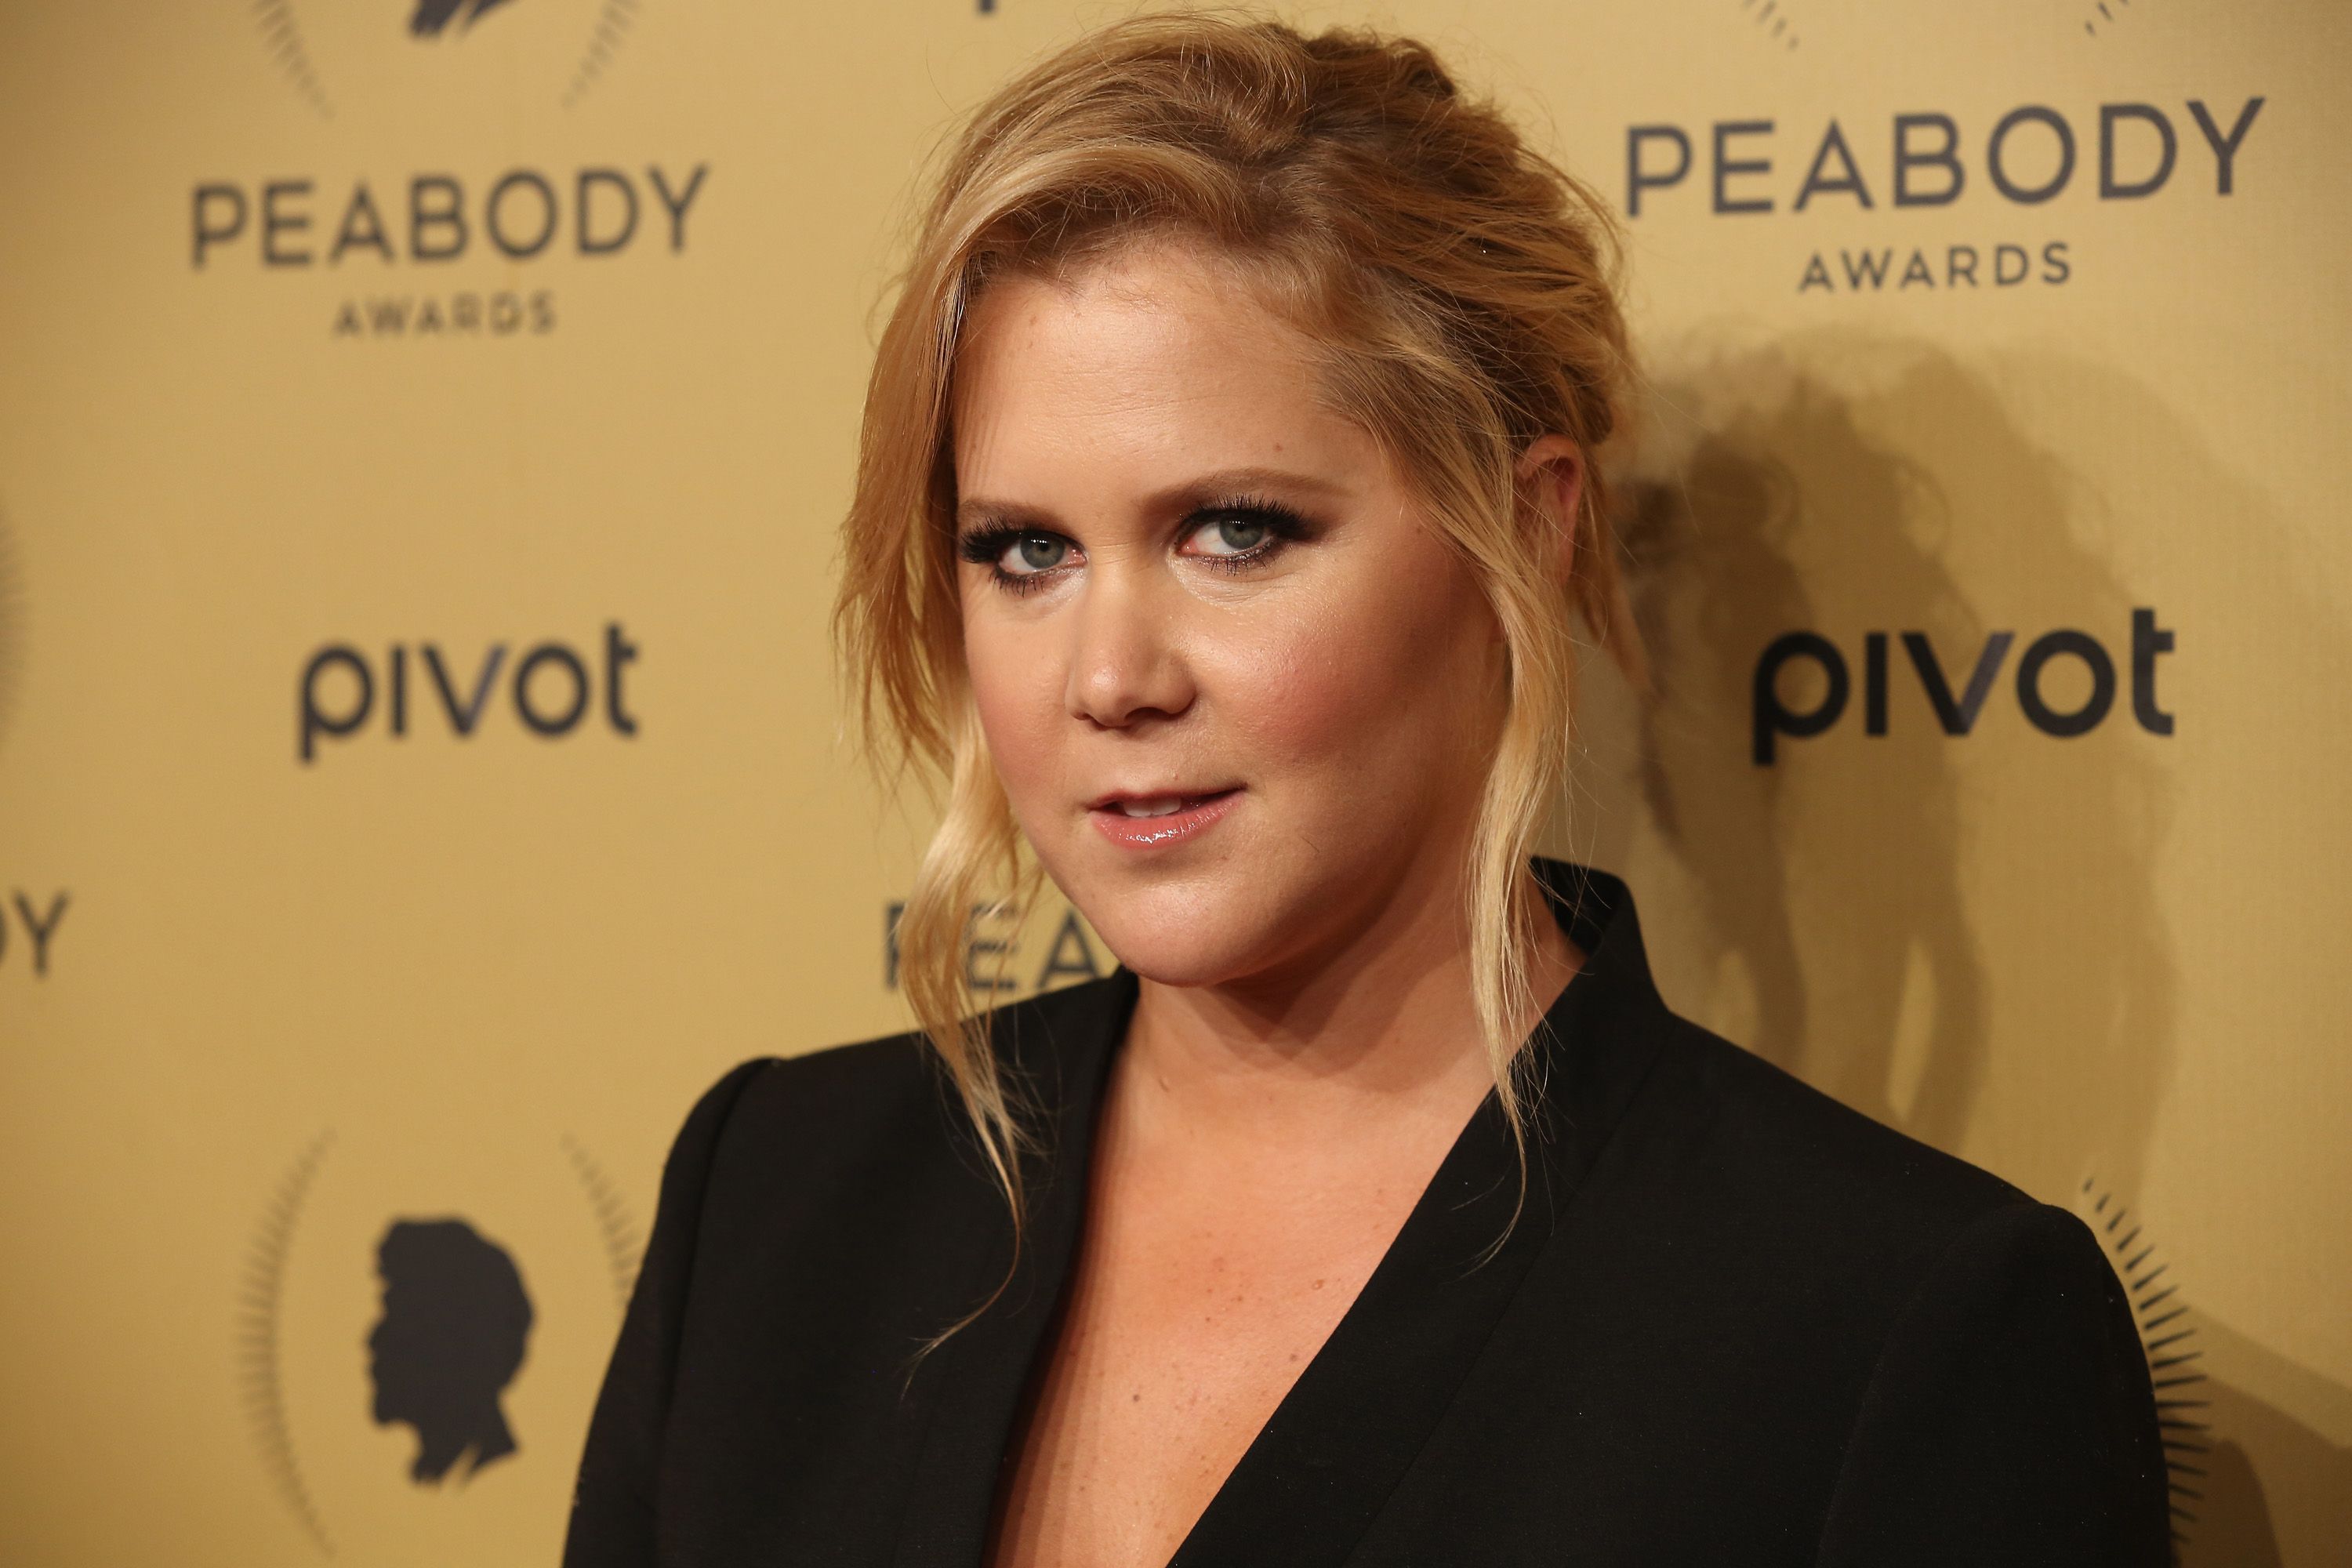 Amy Schumer at the 74th Annual Peabody Awards Ceremony at Cipriani Wall Street on May 31, 2015, in New York City. | Source: Getty Images